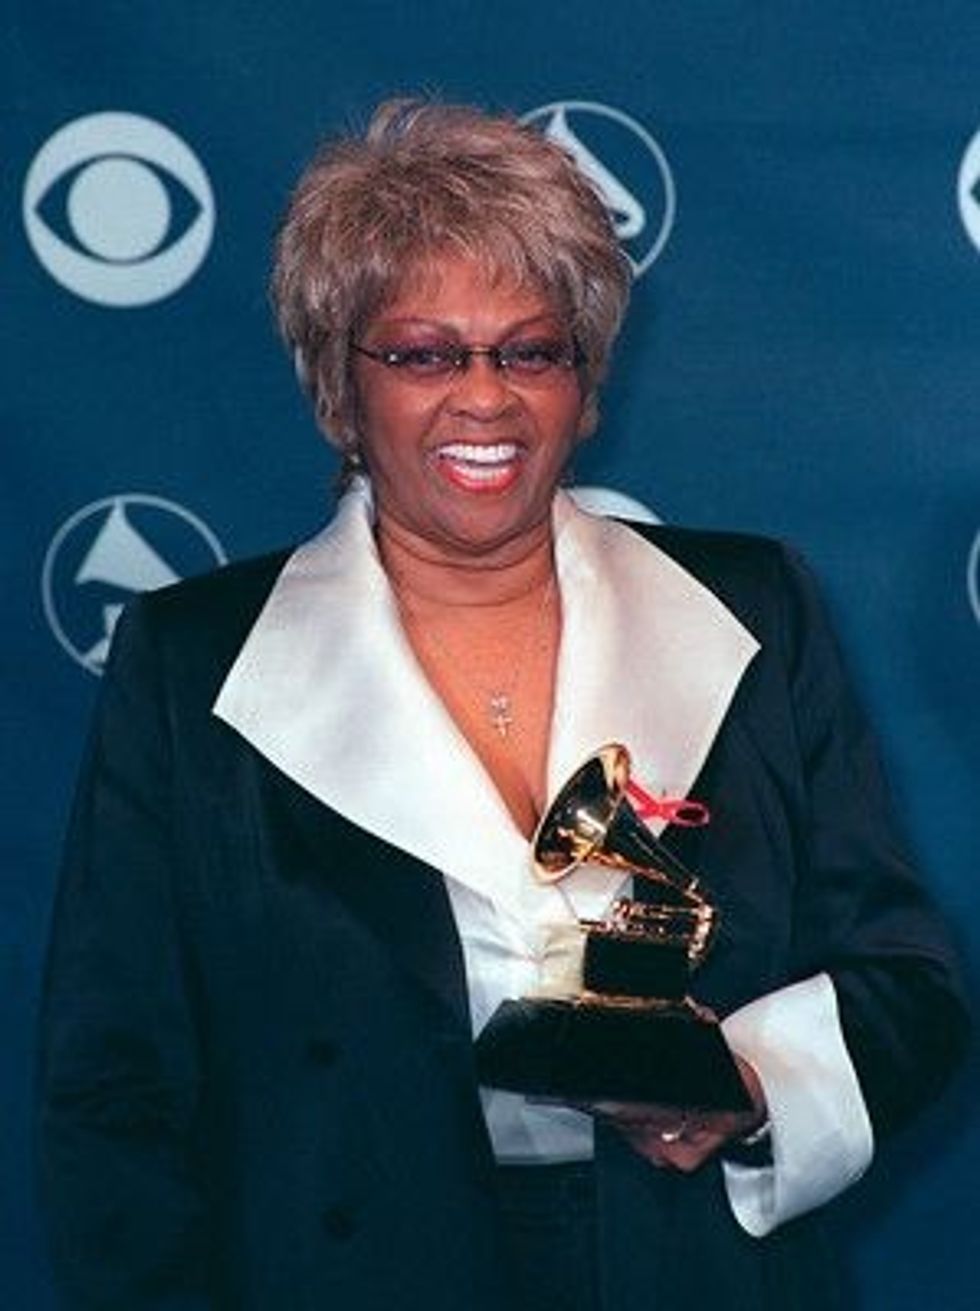 Prior to performing solo, Cissy Houston worked as a backup singer for several artists